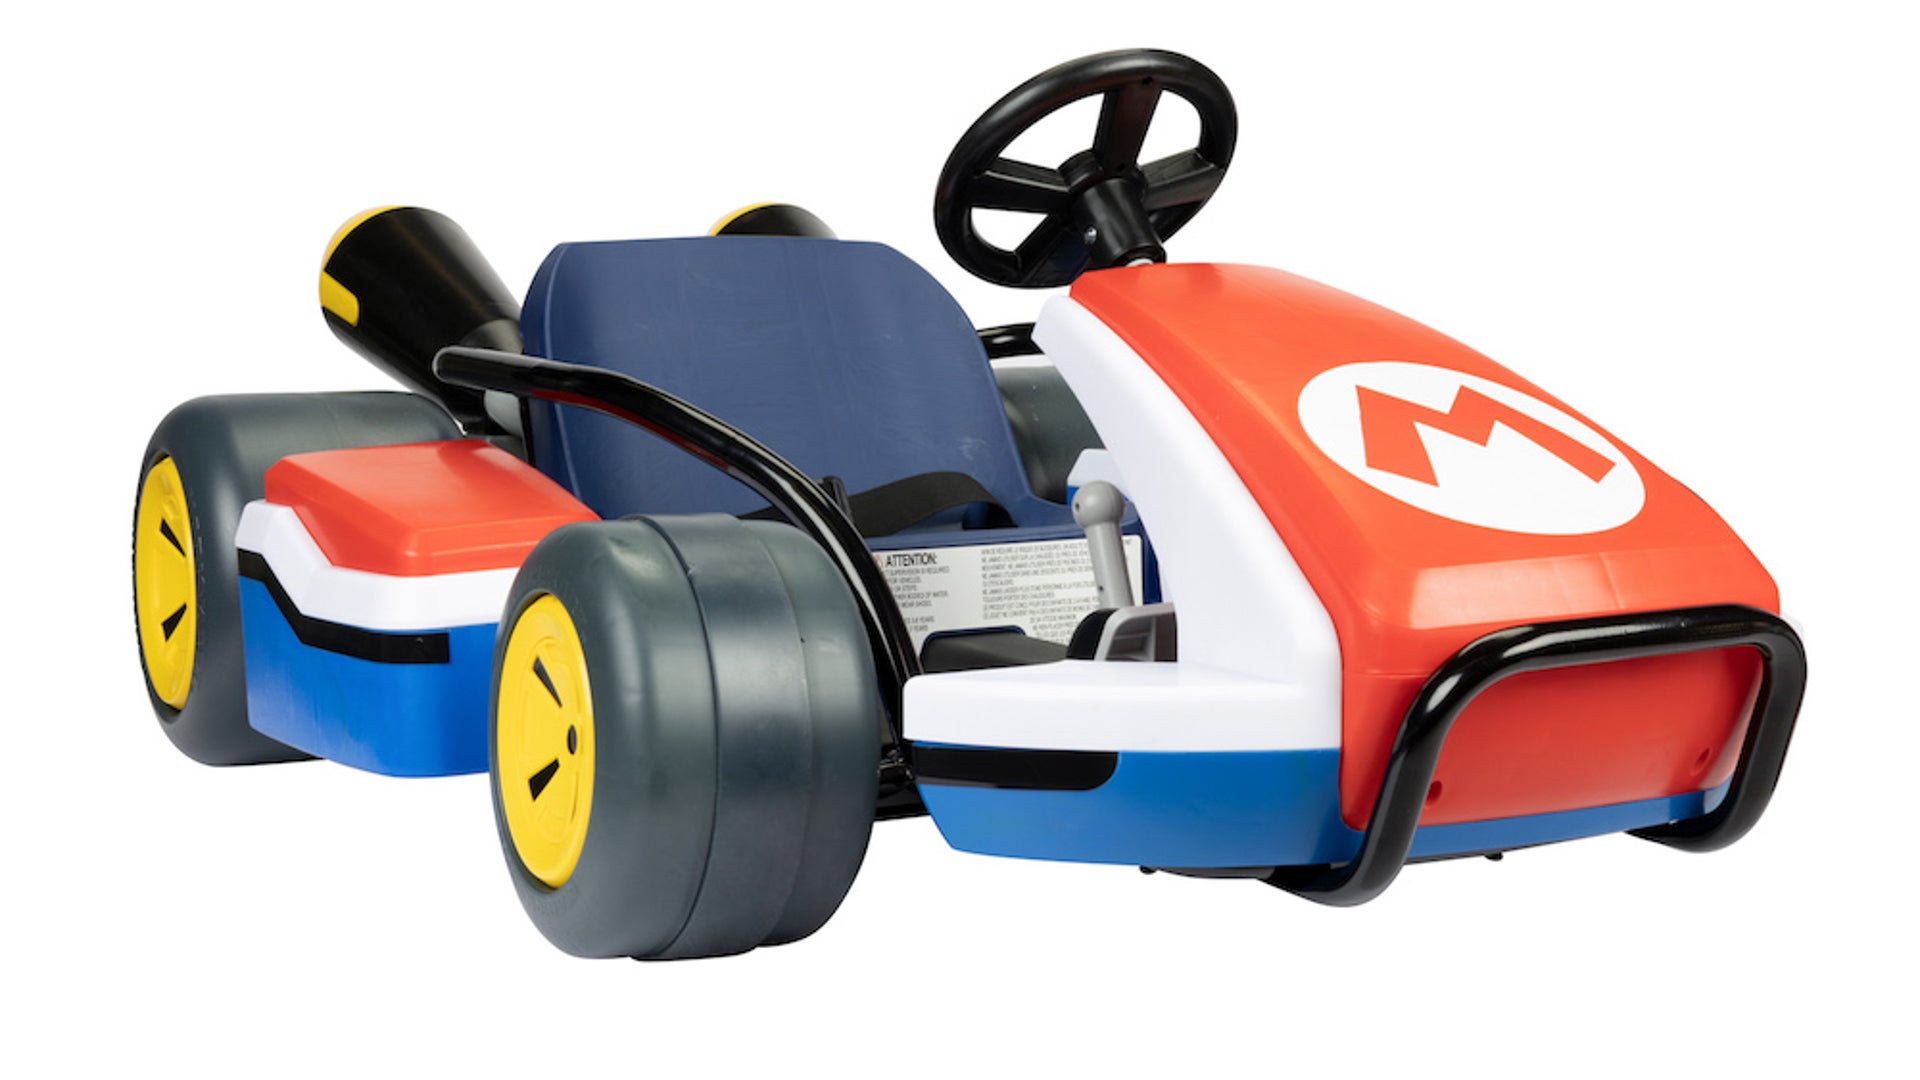 The next race at Dry Dry Ruins is postponed because Mario has been ordered to park his kart. Just like the Tesla Cybertruck last week, the Jakks Pacif